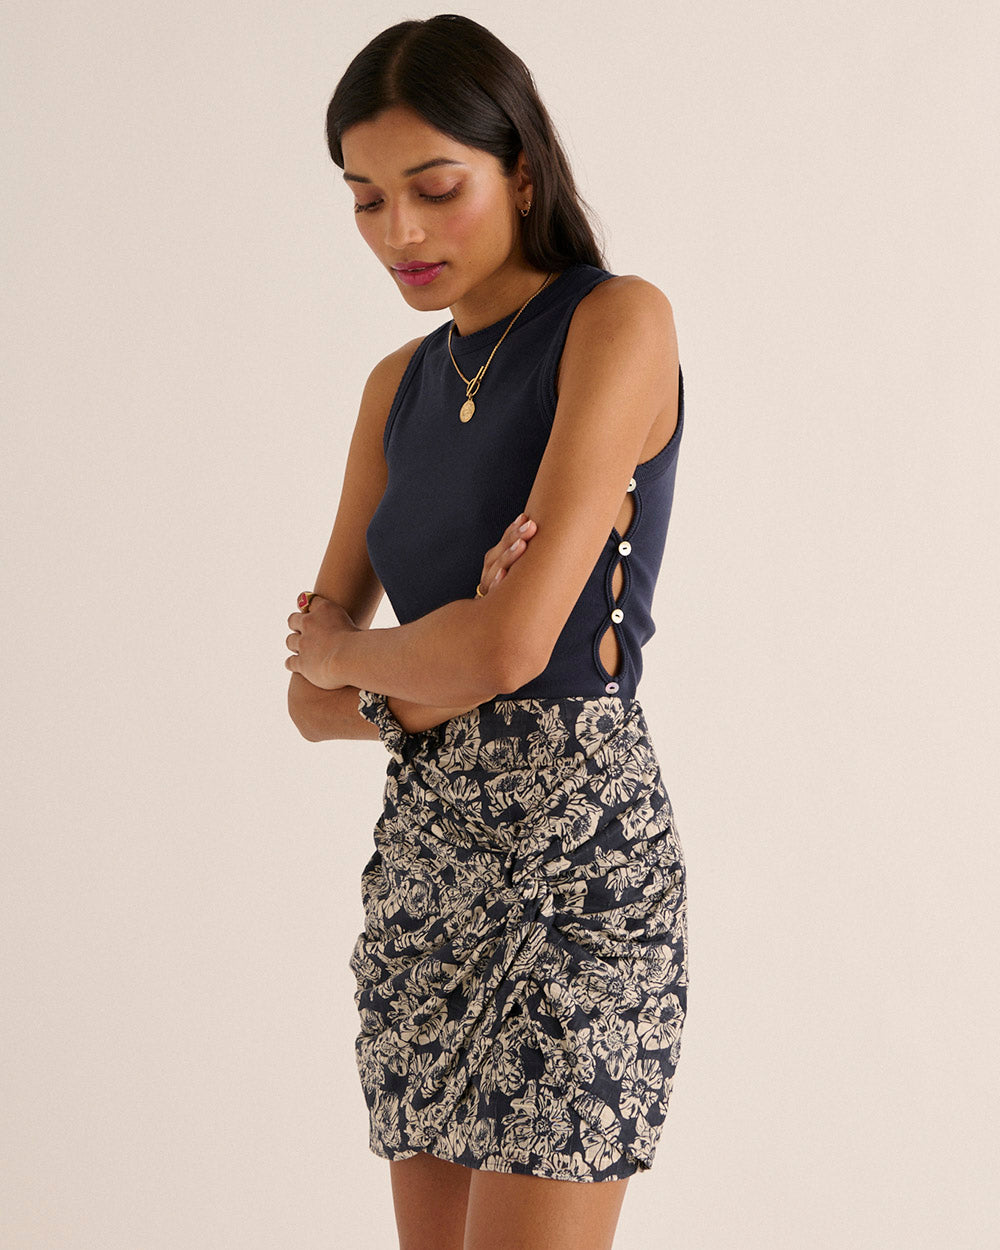 Flore skirt with flower party print, navy and ecru stripes